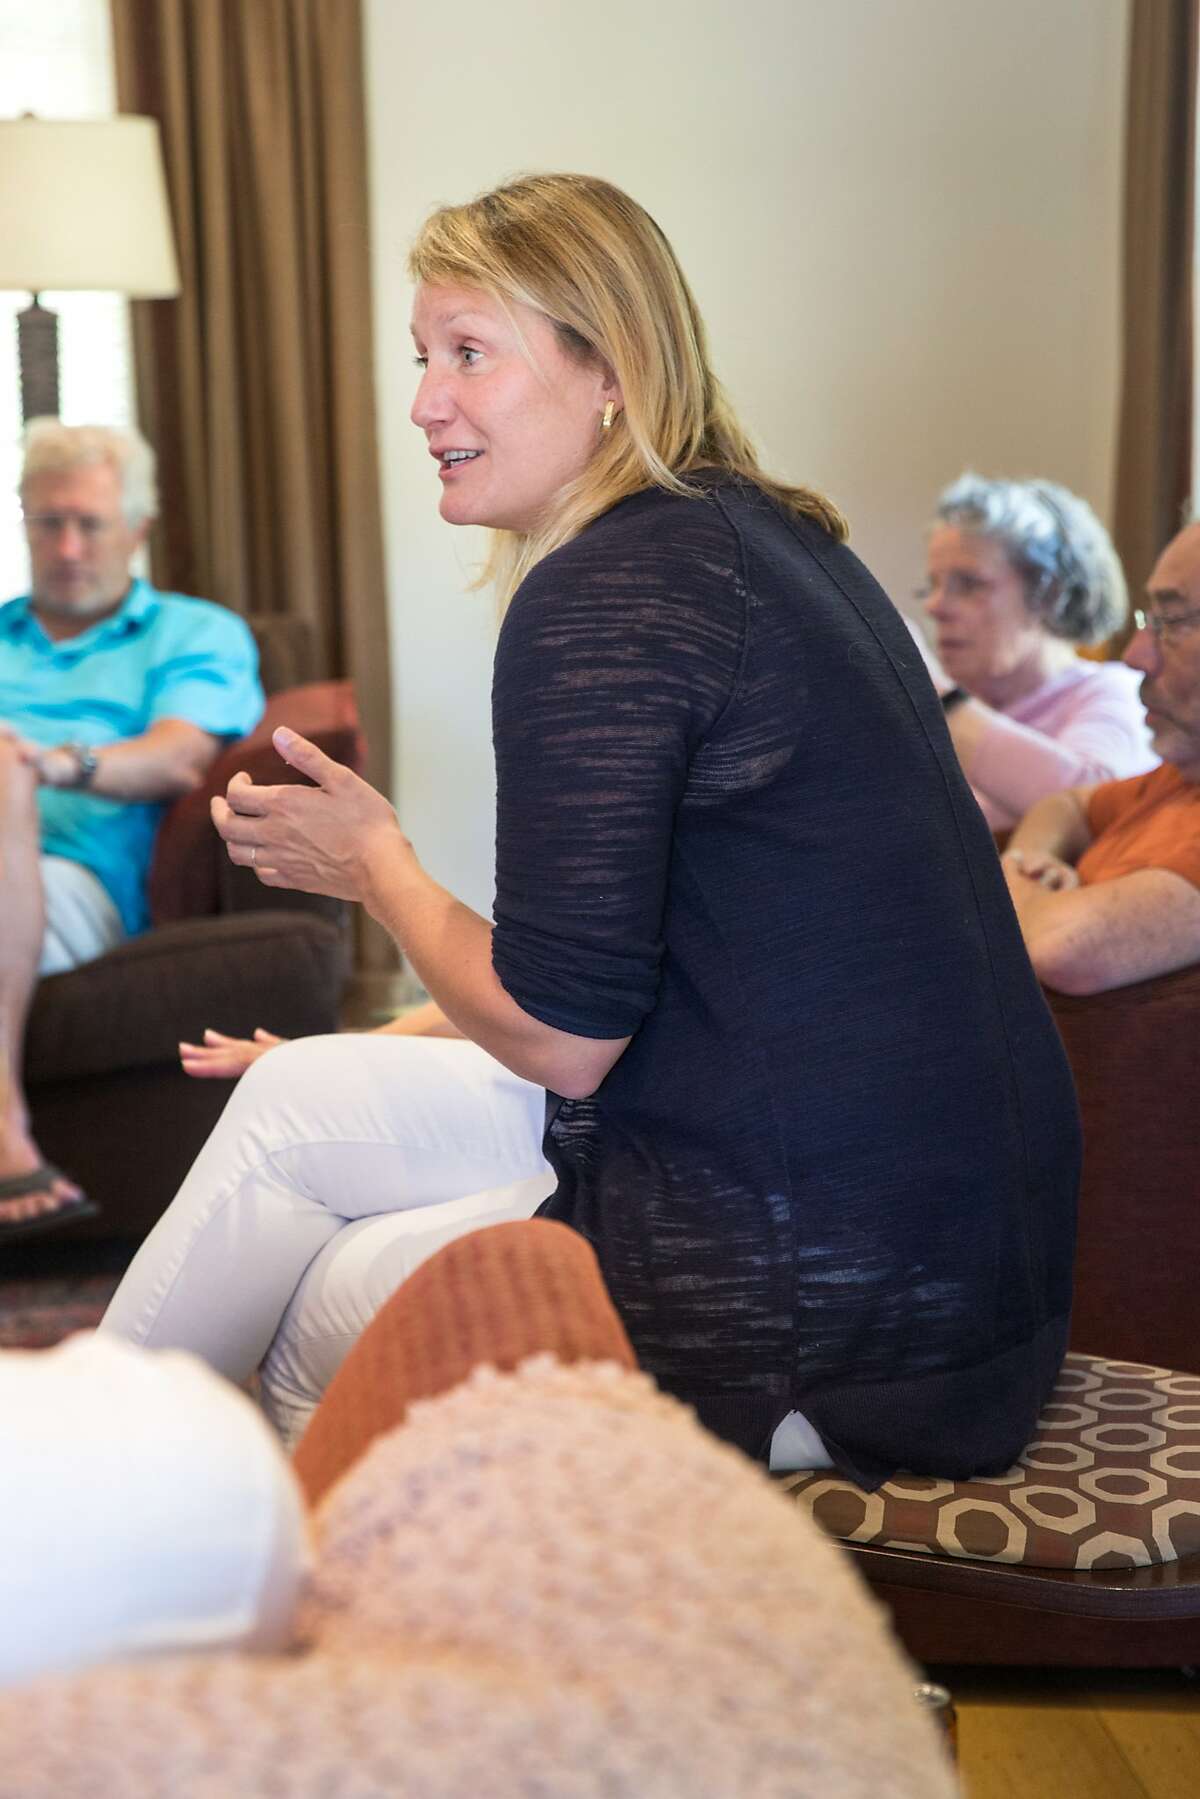 Buffy Wicks, a candidate for the 15th State Assembly district, talks with supporters during a house party hosted by Carmen Murray, leader in the local Organizing For Action group. On Sunday, October 7, 2018 in Oakland Calif.